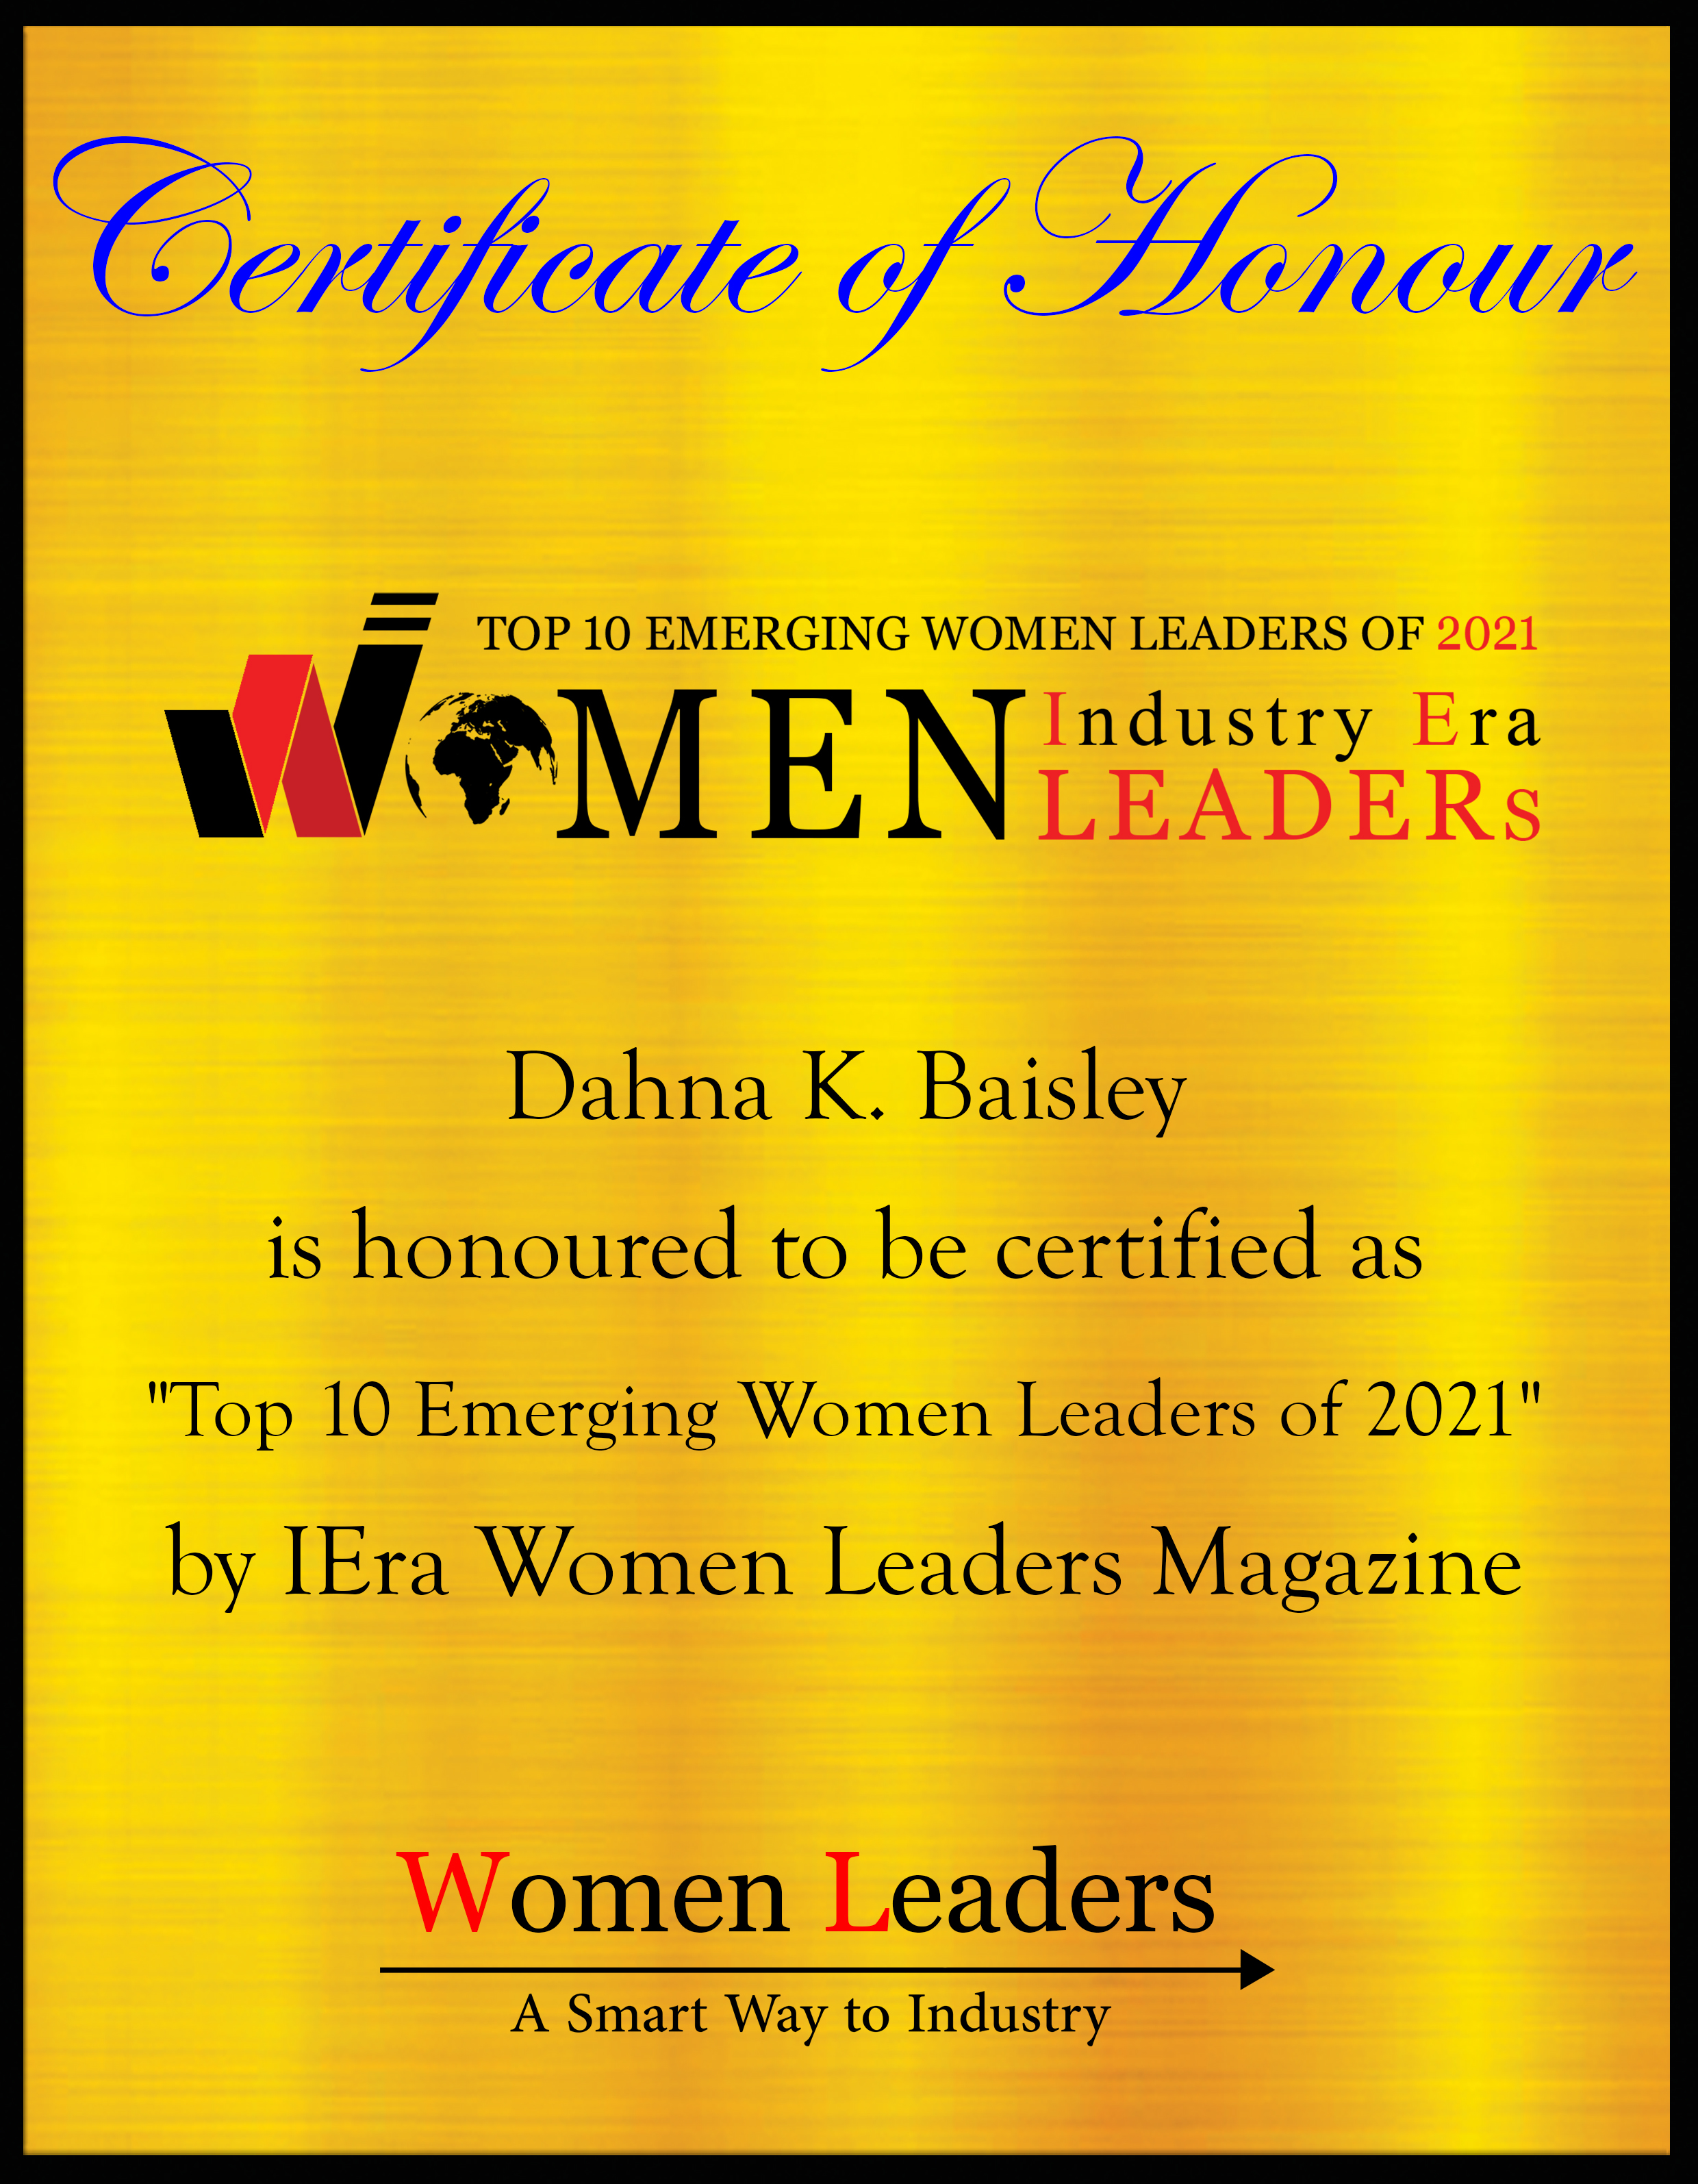 Dahna K. Baisley, CHRO at Stephen Gould, Most Empowering Women Leaders of 2021